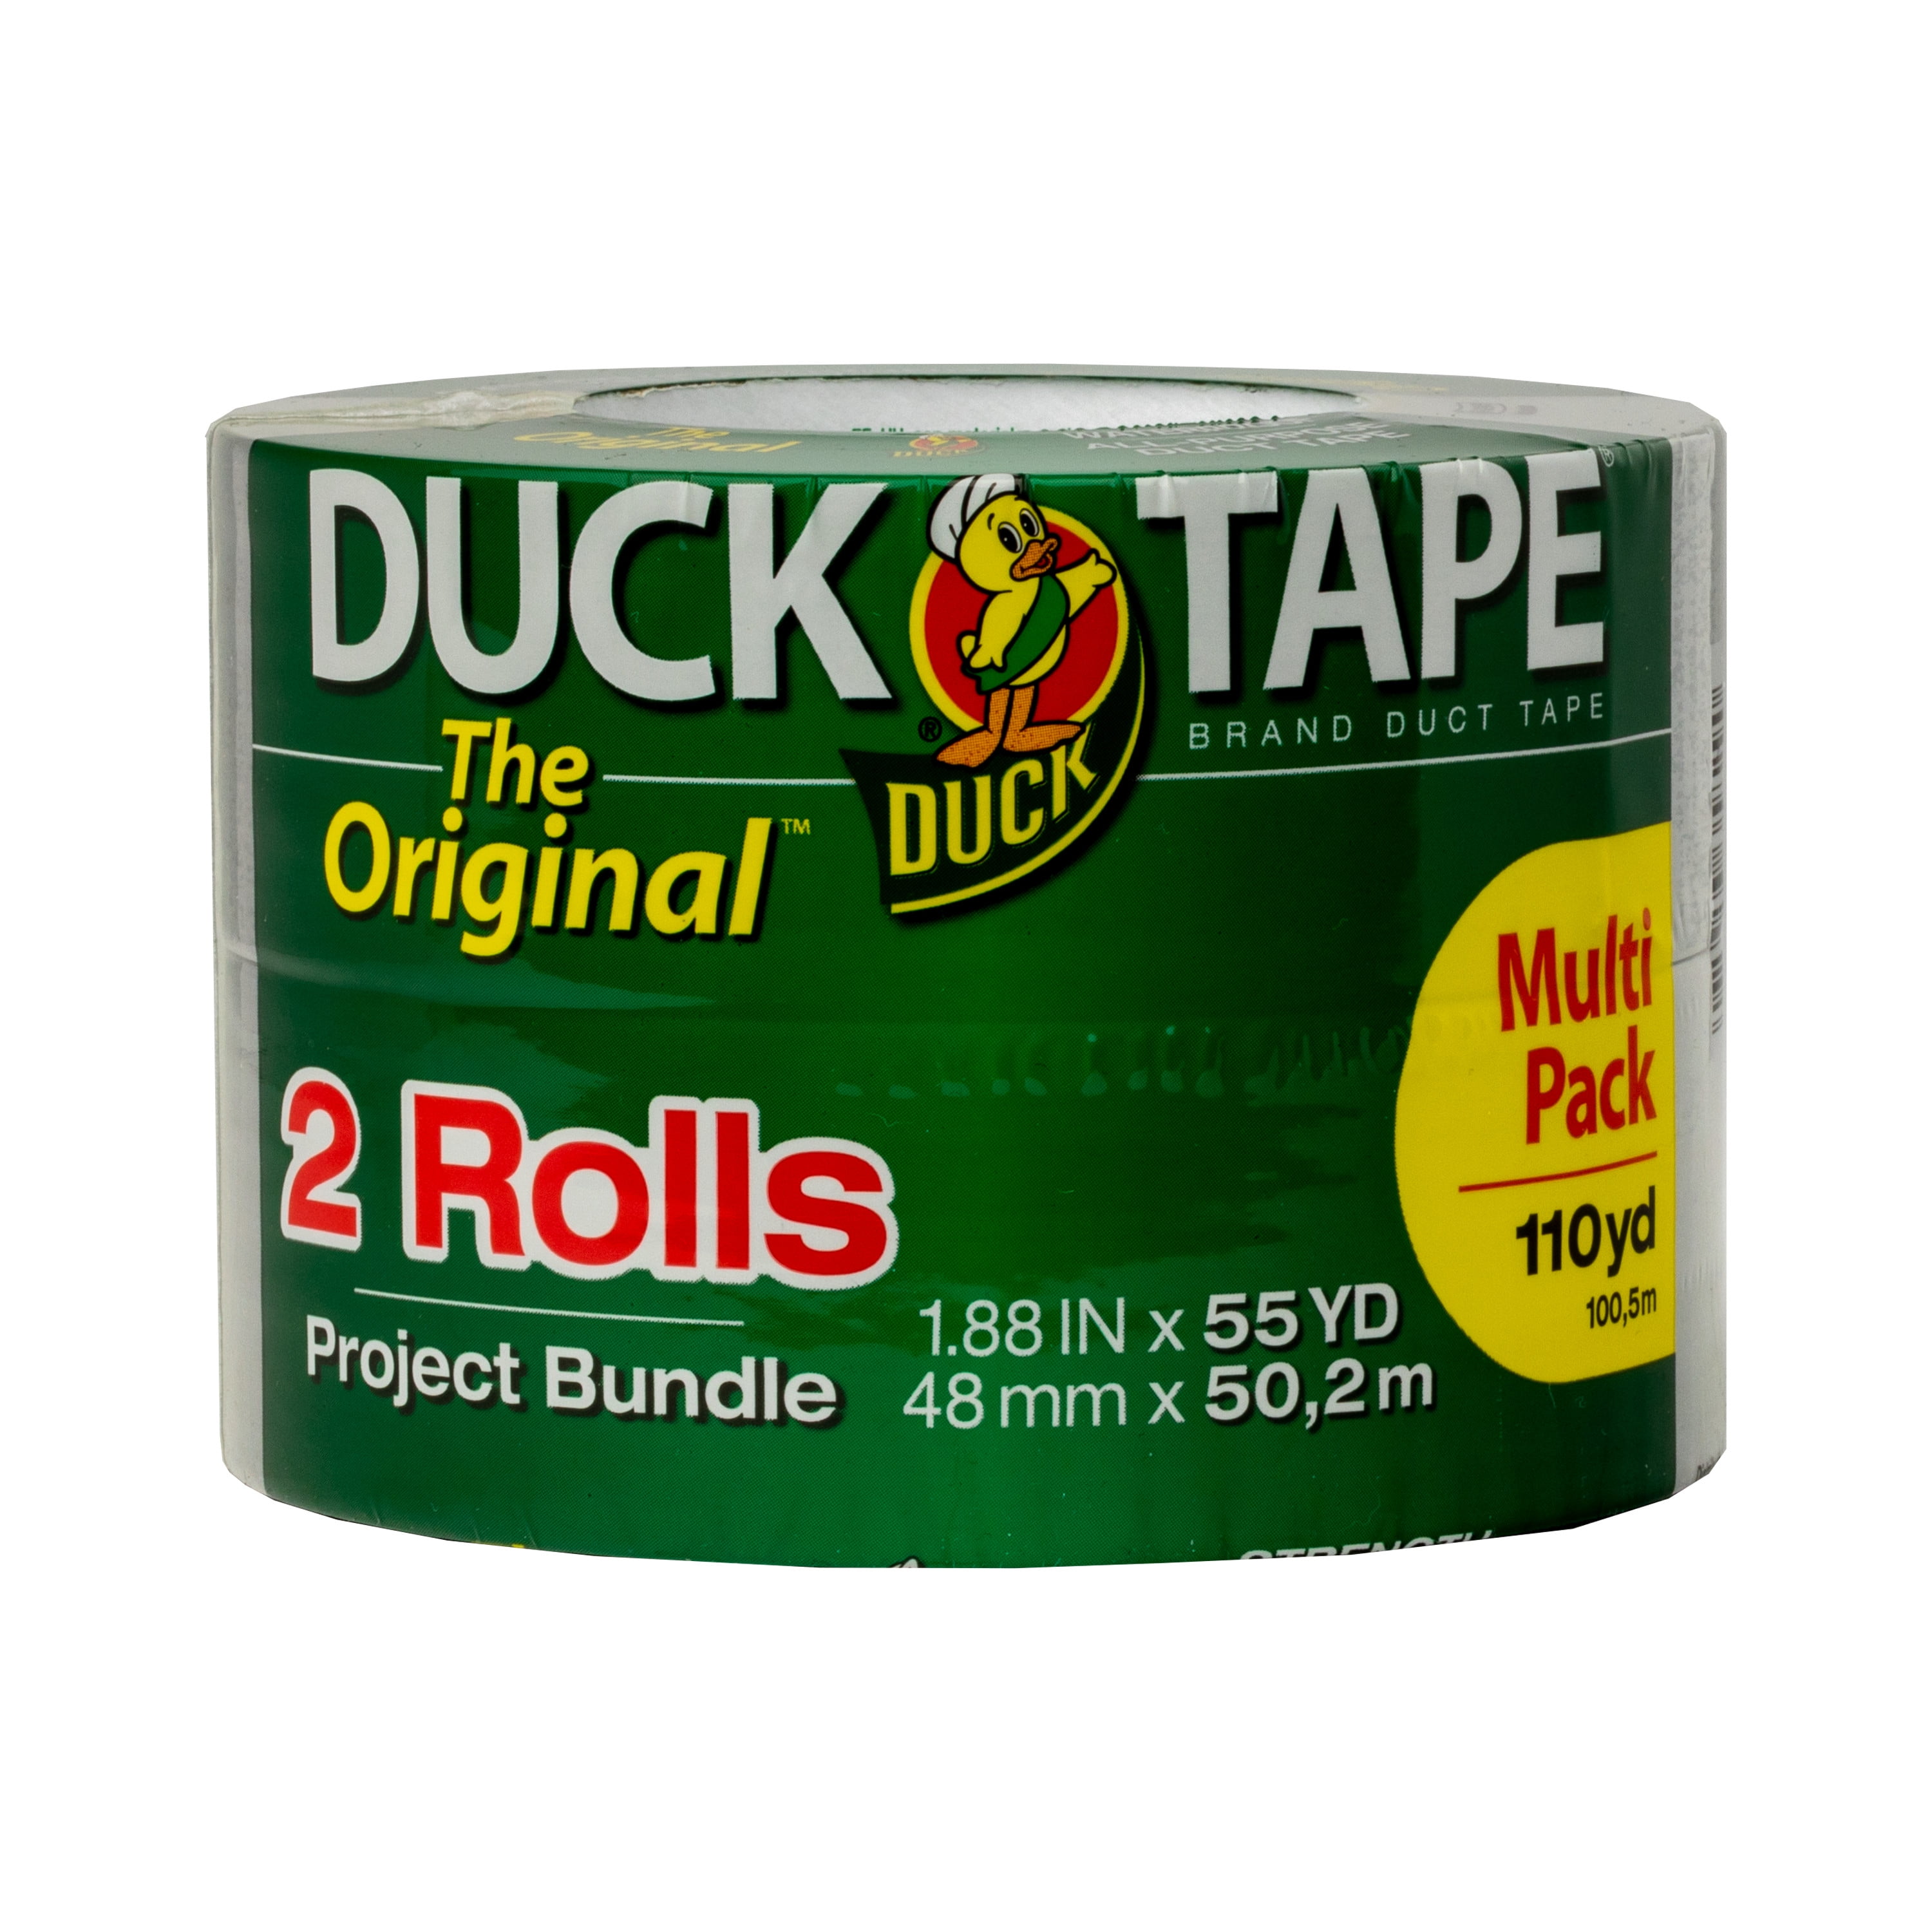 4 COUNT 3M DUCT TAPE BASIC 1.88 IN X 55 YD